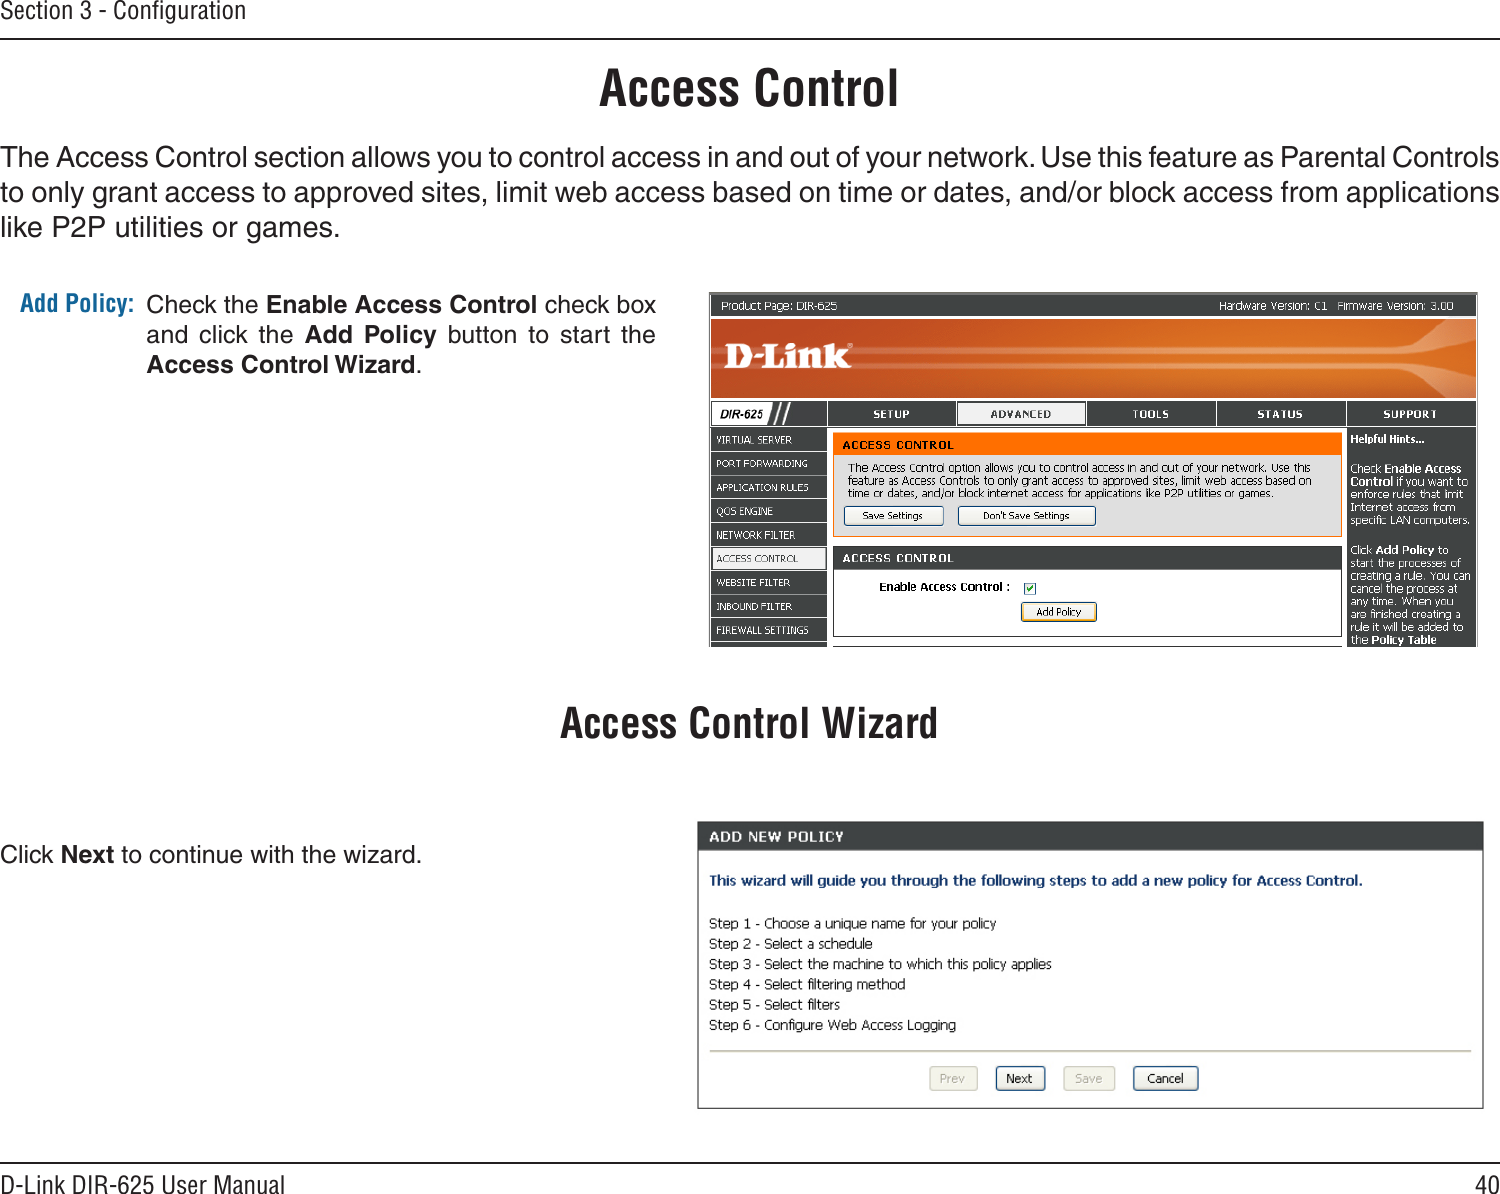 40D-Link DIR-625 User ManualSection 3 - ConﬁgurationAccess ControlCheck the Enable Access Control check box and  click  the  Add  Policy  button  to  start  the Access Control Wizard. Add Policy:The Access Control section allows you to control access in and out of your network. Use this feature as Parental Controls to only grant access to approved sites, limit web access based on time or dates, and/or block access from applications like P2P utilities or games.Click Next to continue with the wizard.Access Control Wizard